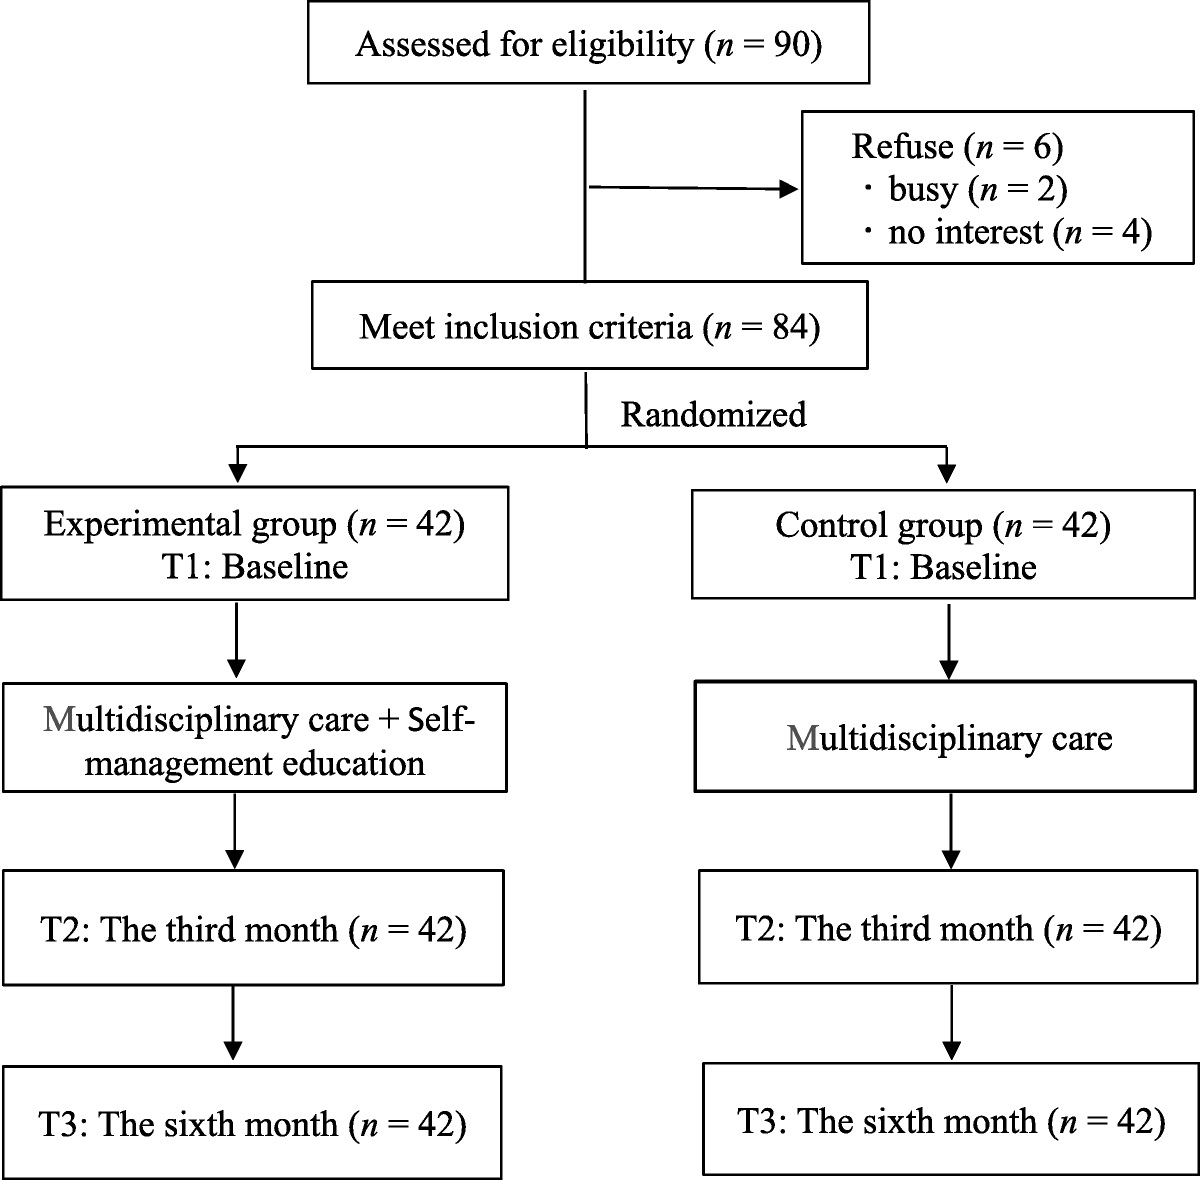 Effects of a Health Literacy Education Program on Mental Health and Renal Function in Patients With Chronic Kidney Disease: A Randomized Controlled Trial